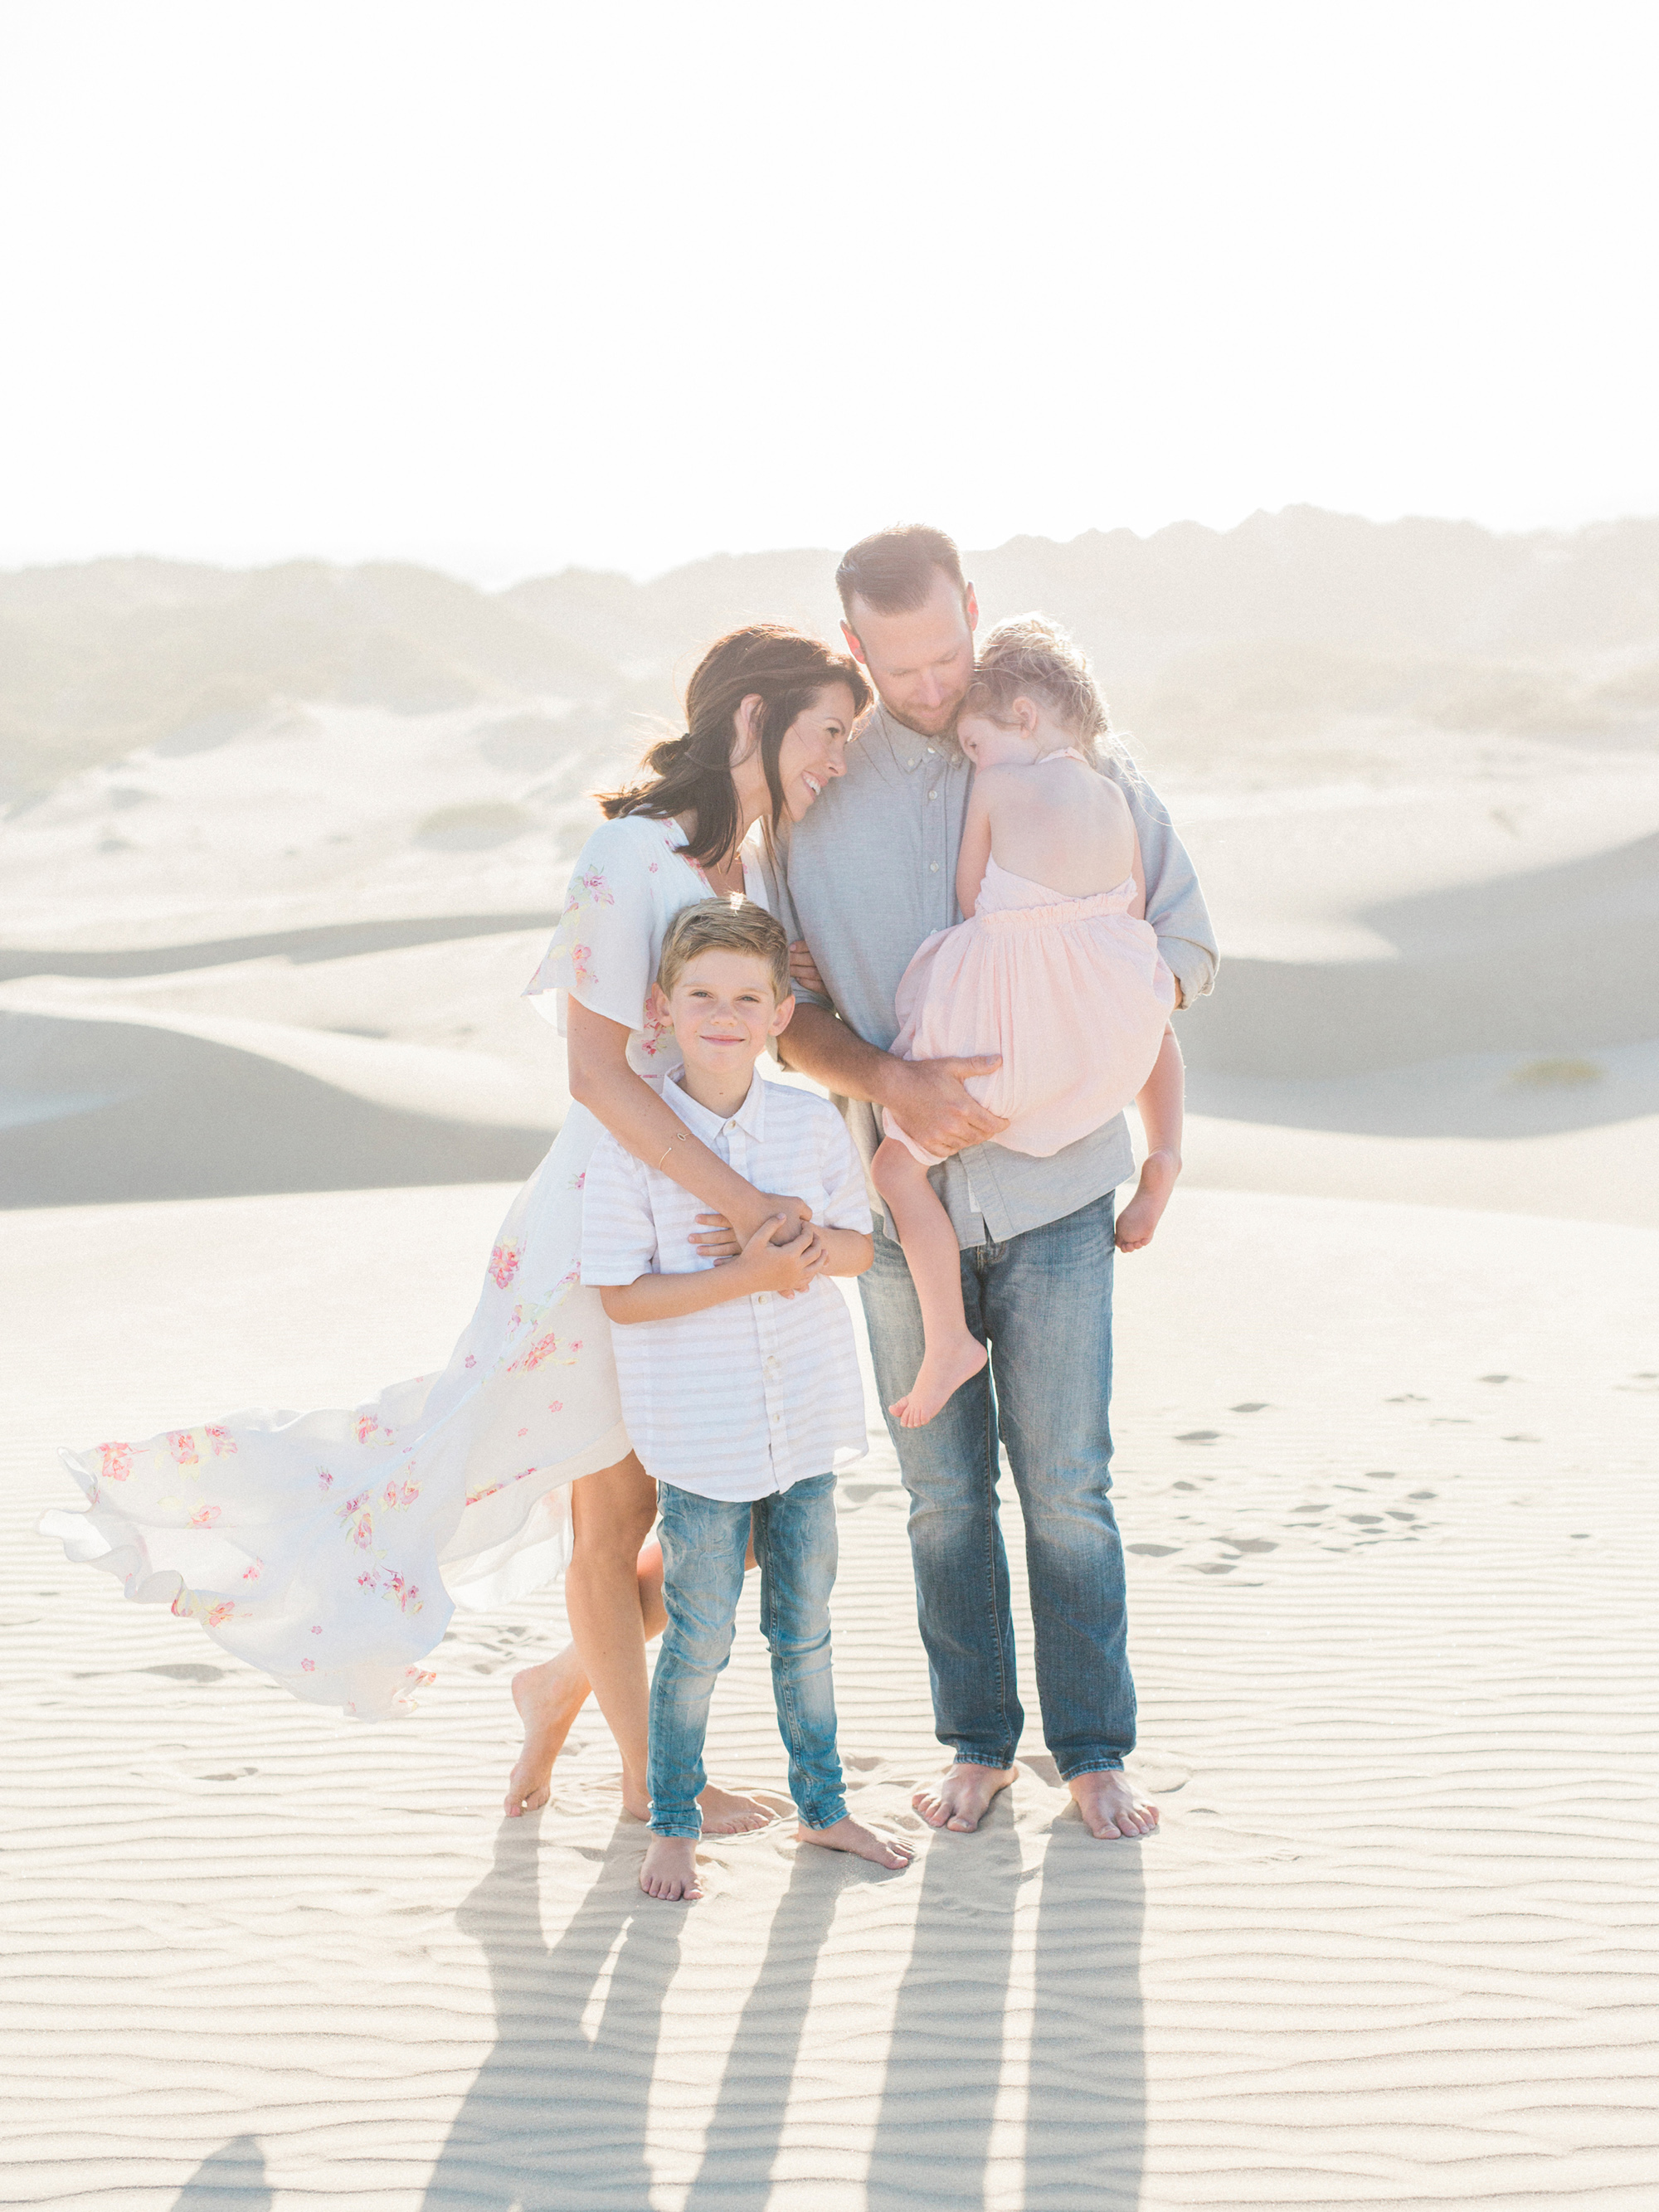 Family lifestyle session by Dallas film photographer Tenth & Grace